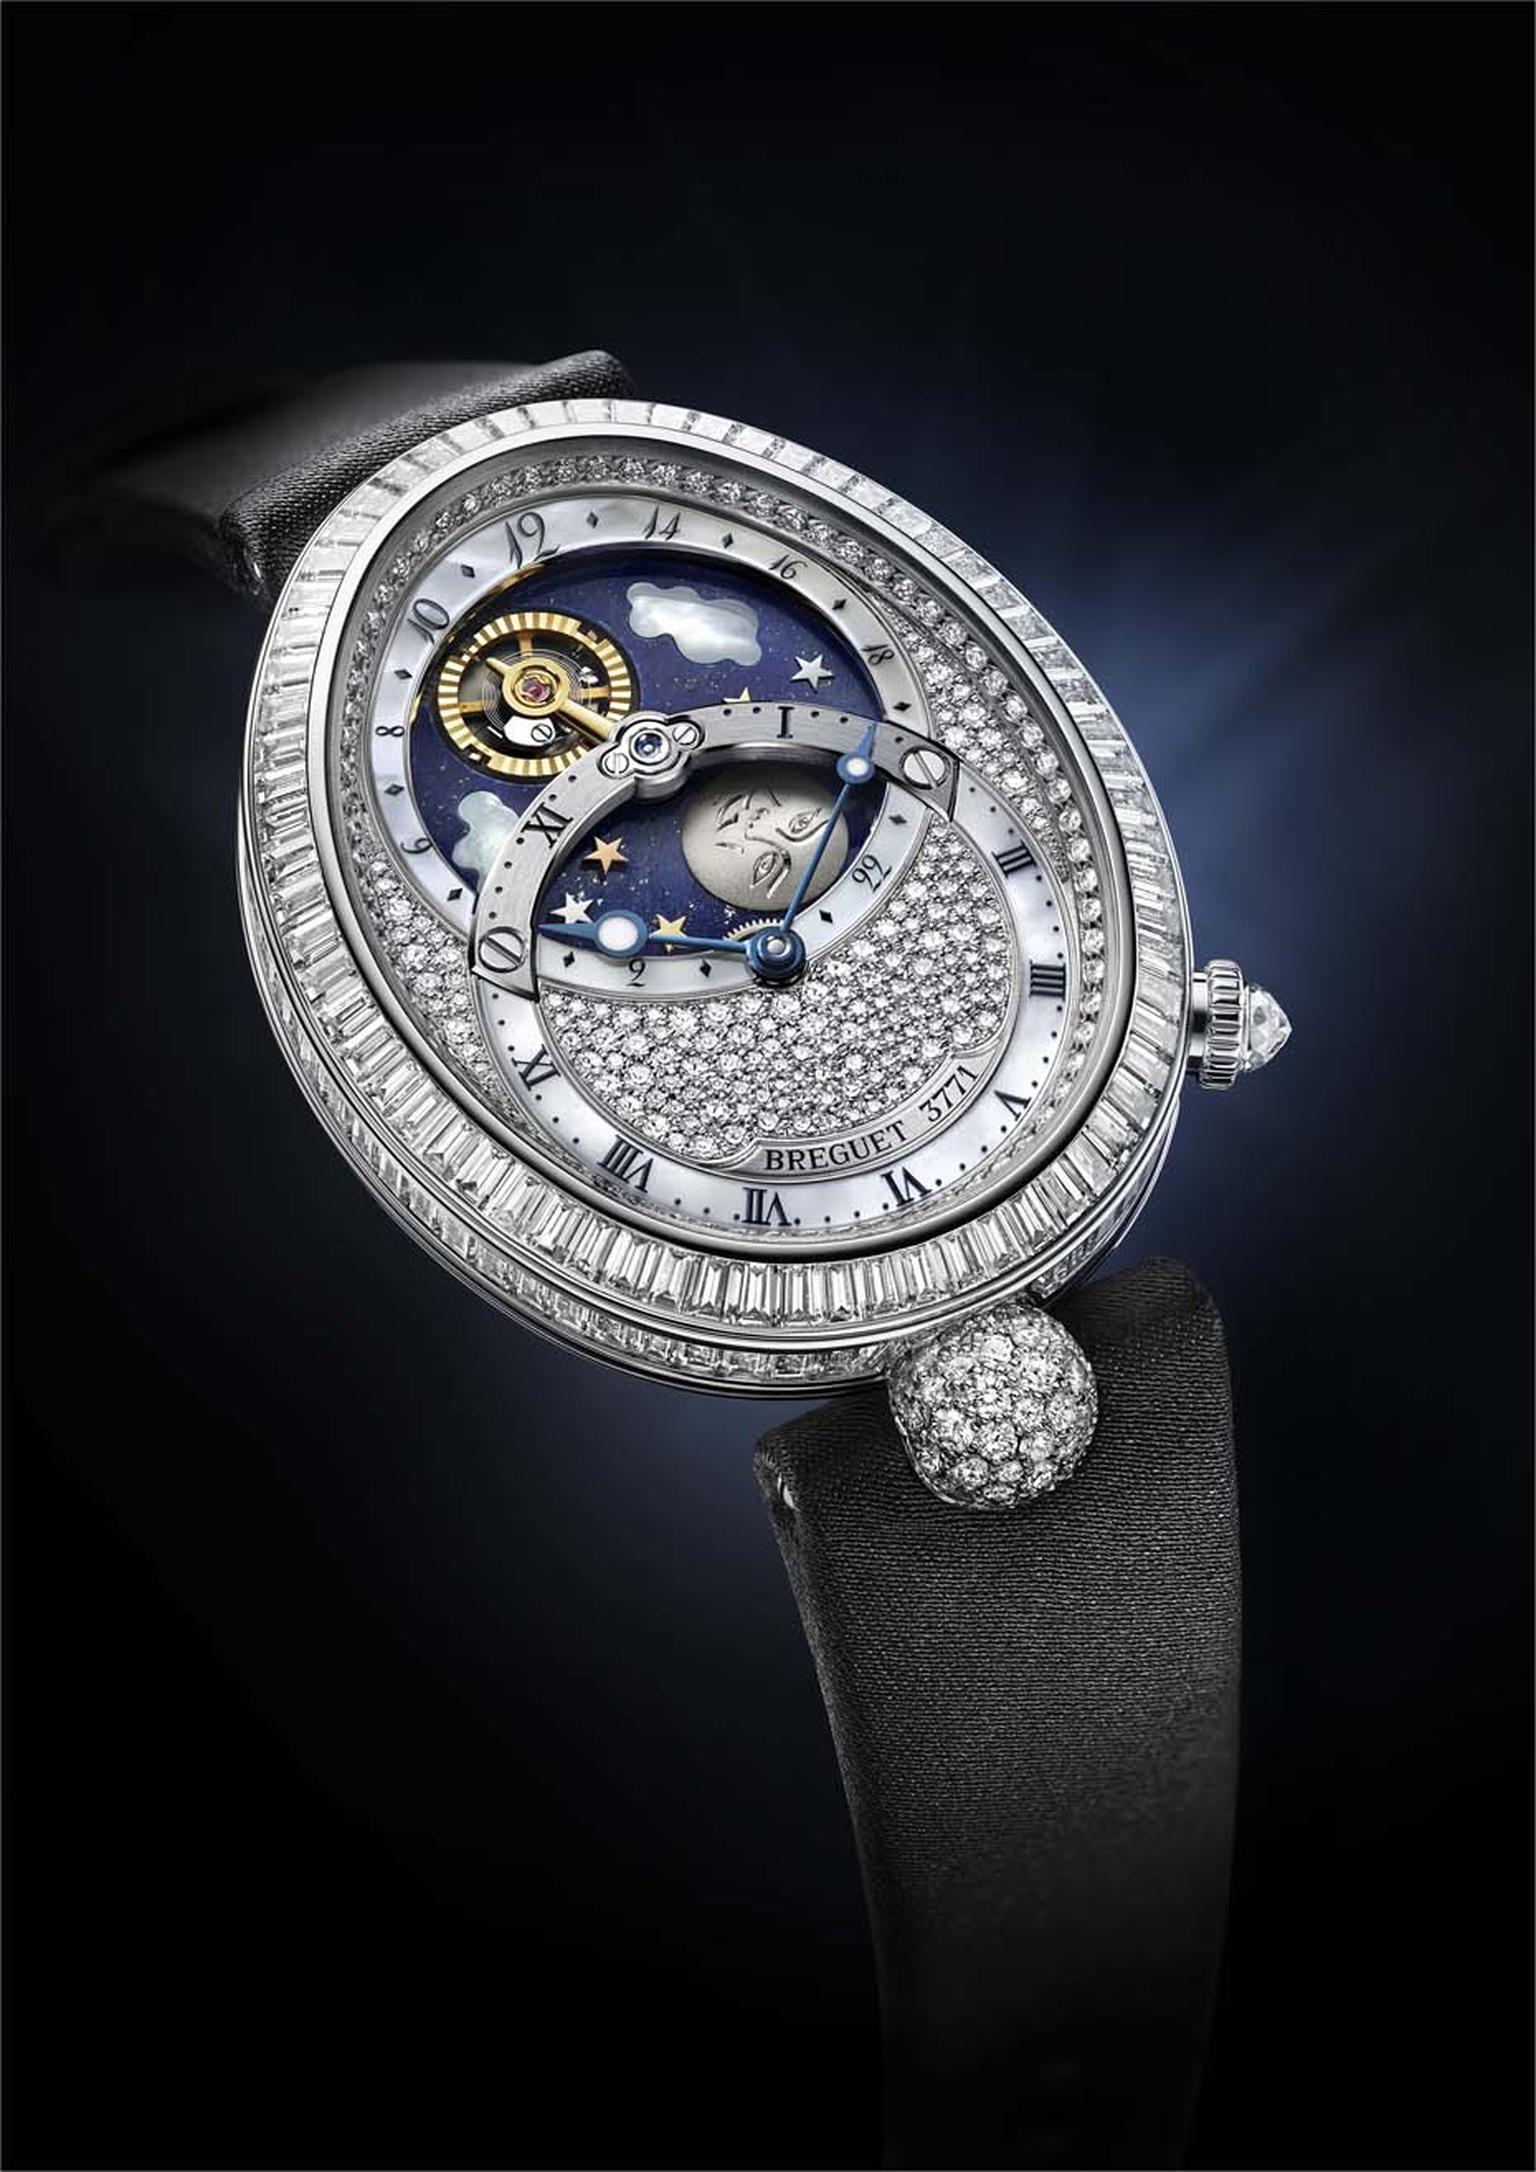 Breguet Reine de Naples Jour/Nuit watch indicates the hours and minutes in the lower dial; the upper dial enacts the daily transit of the Sun represented by the golden tourbillion.